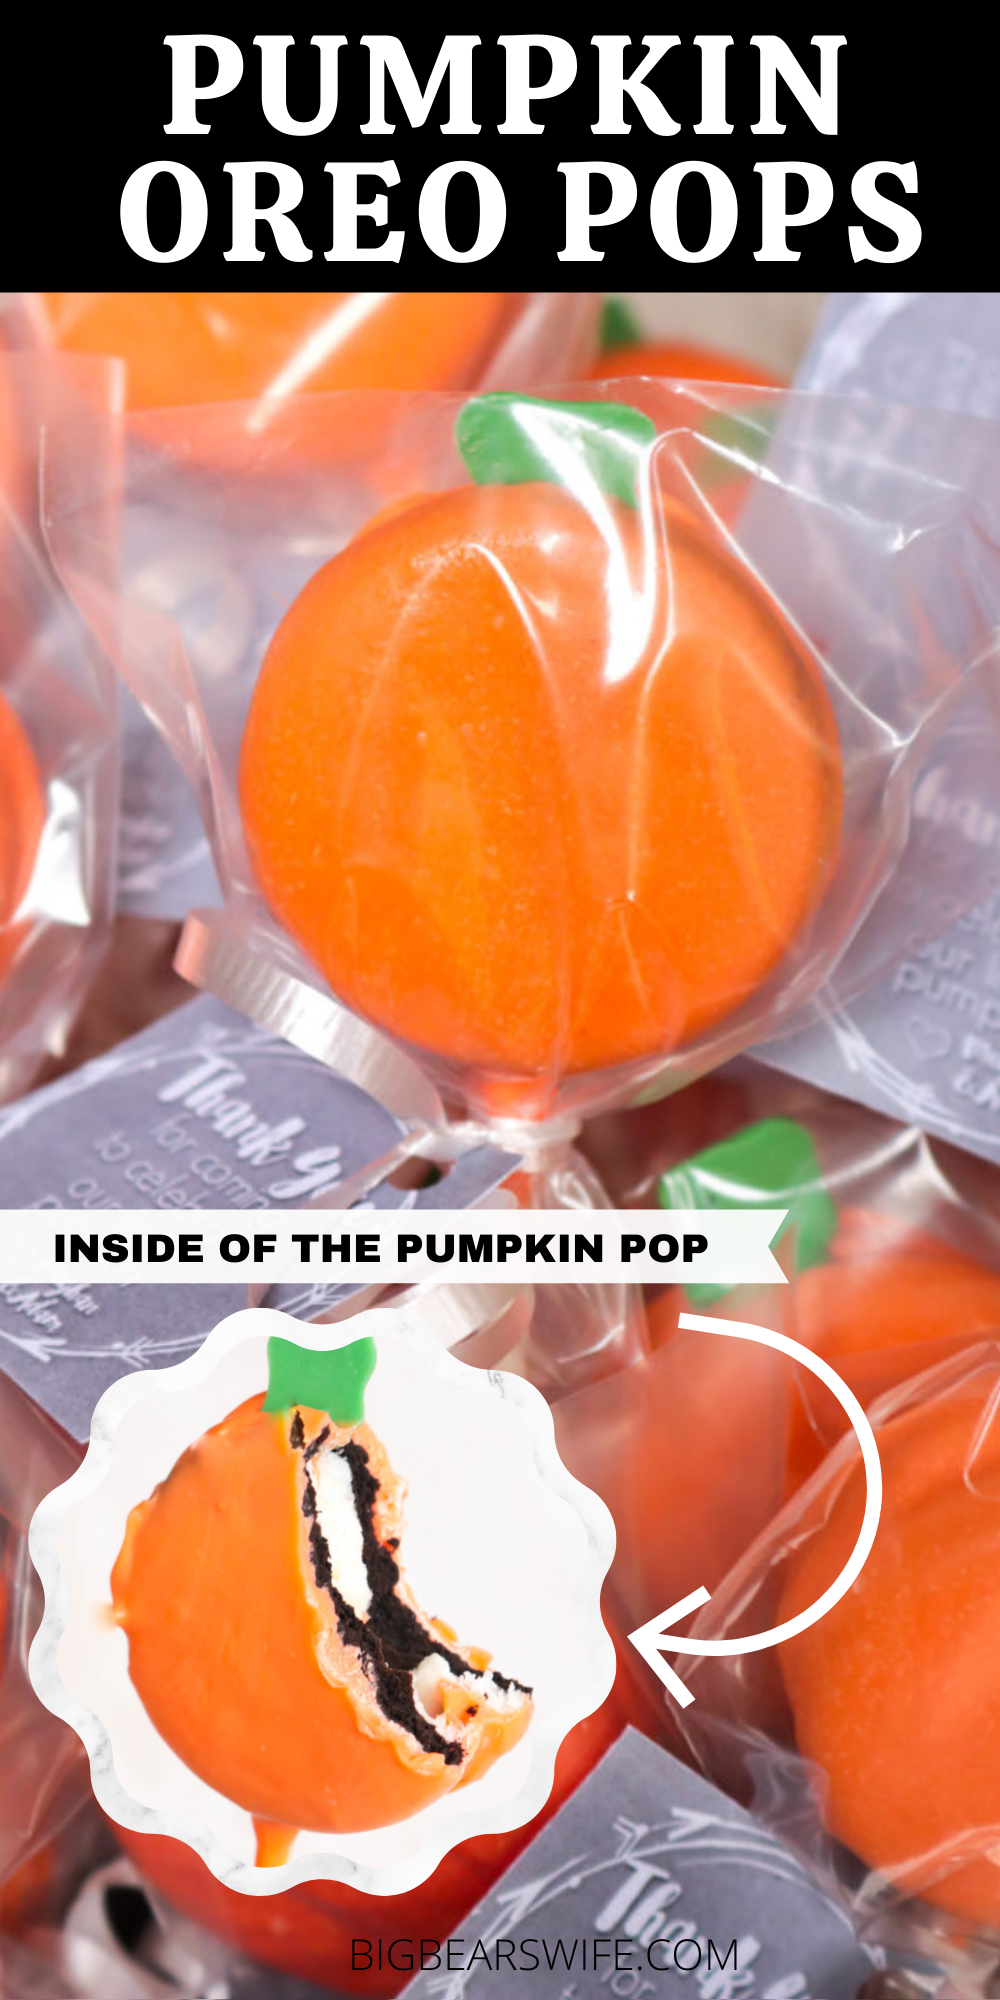 These little Pumpkin Oreo Pops are perfect for a Halloween party, Fall festival or as a pumpkin baby shower favor!  via @bigbearswife